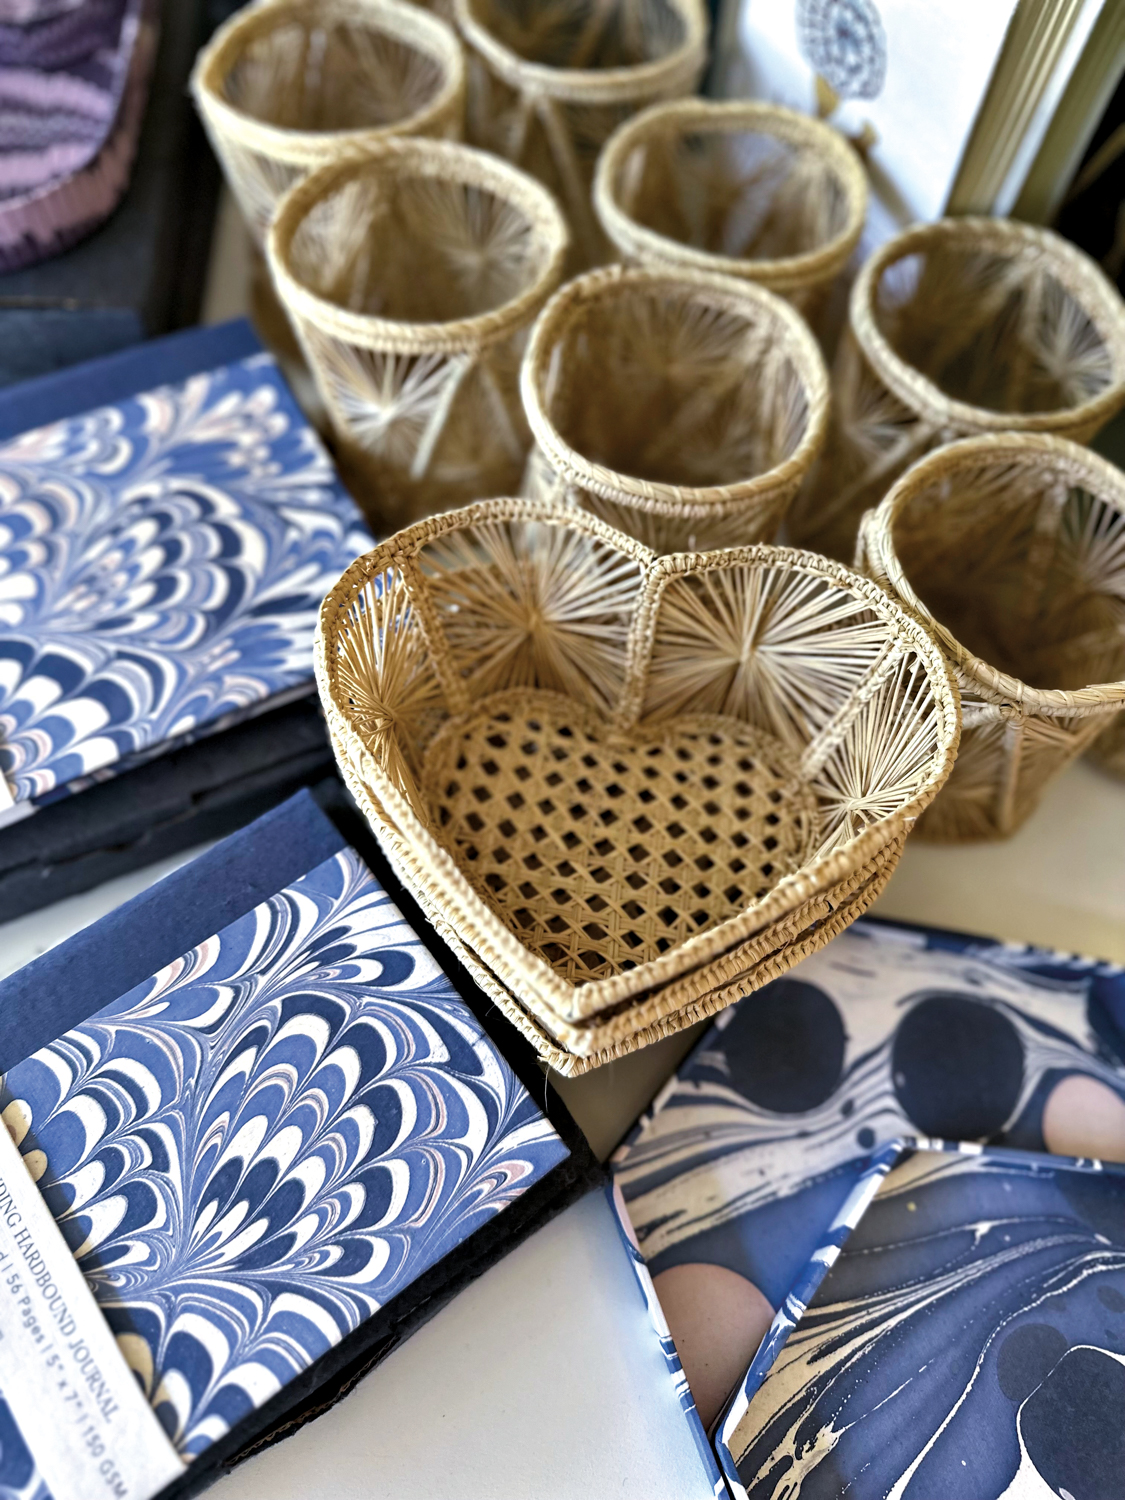 Small, woven heart-shaped basket and blue notebooks in shop by Table topped with greenery, notebooks and colorful ceramics in shop by Josephine Fisher Freckmann